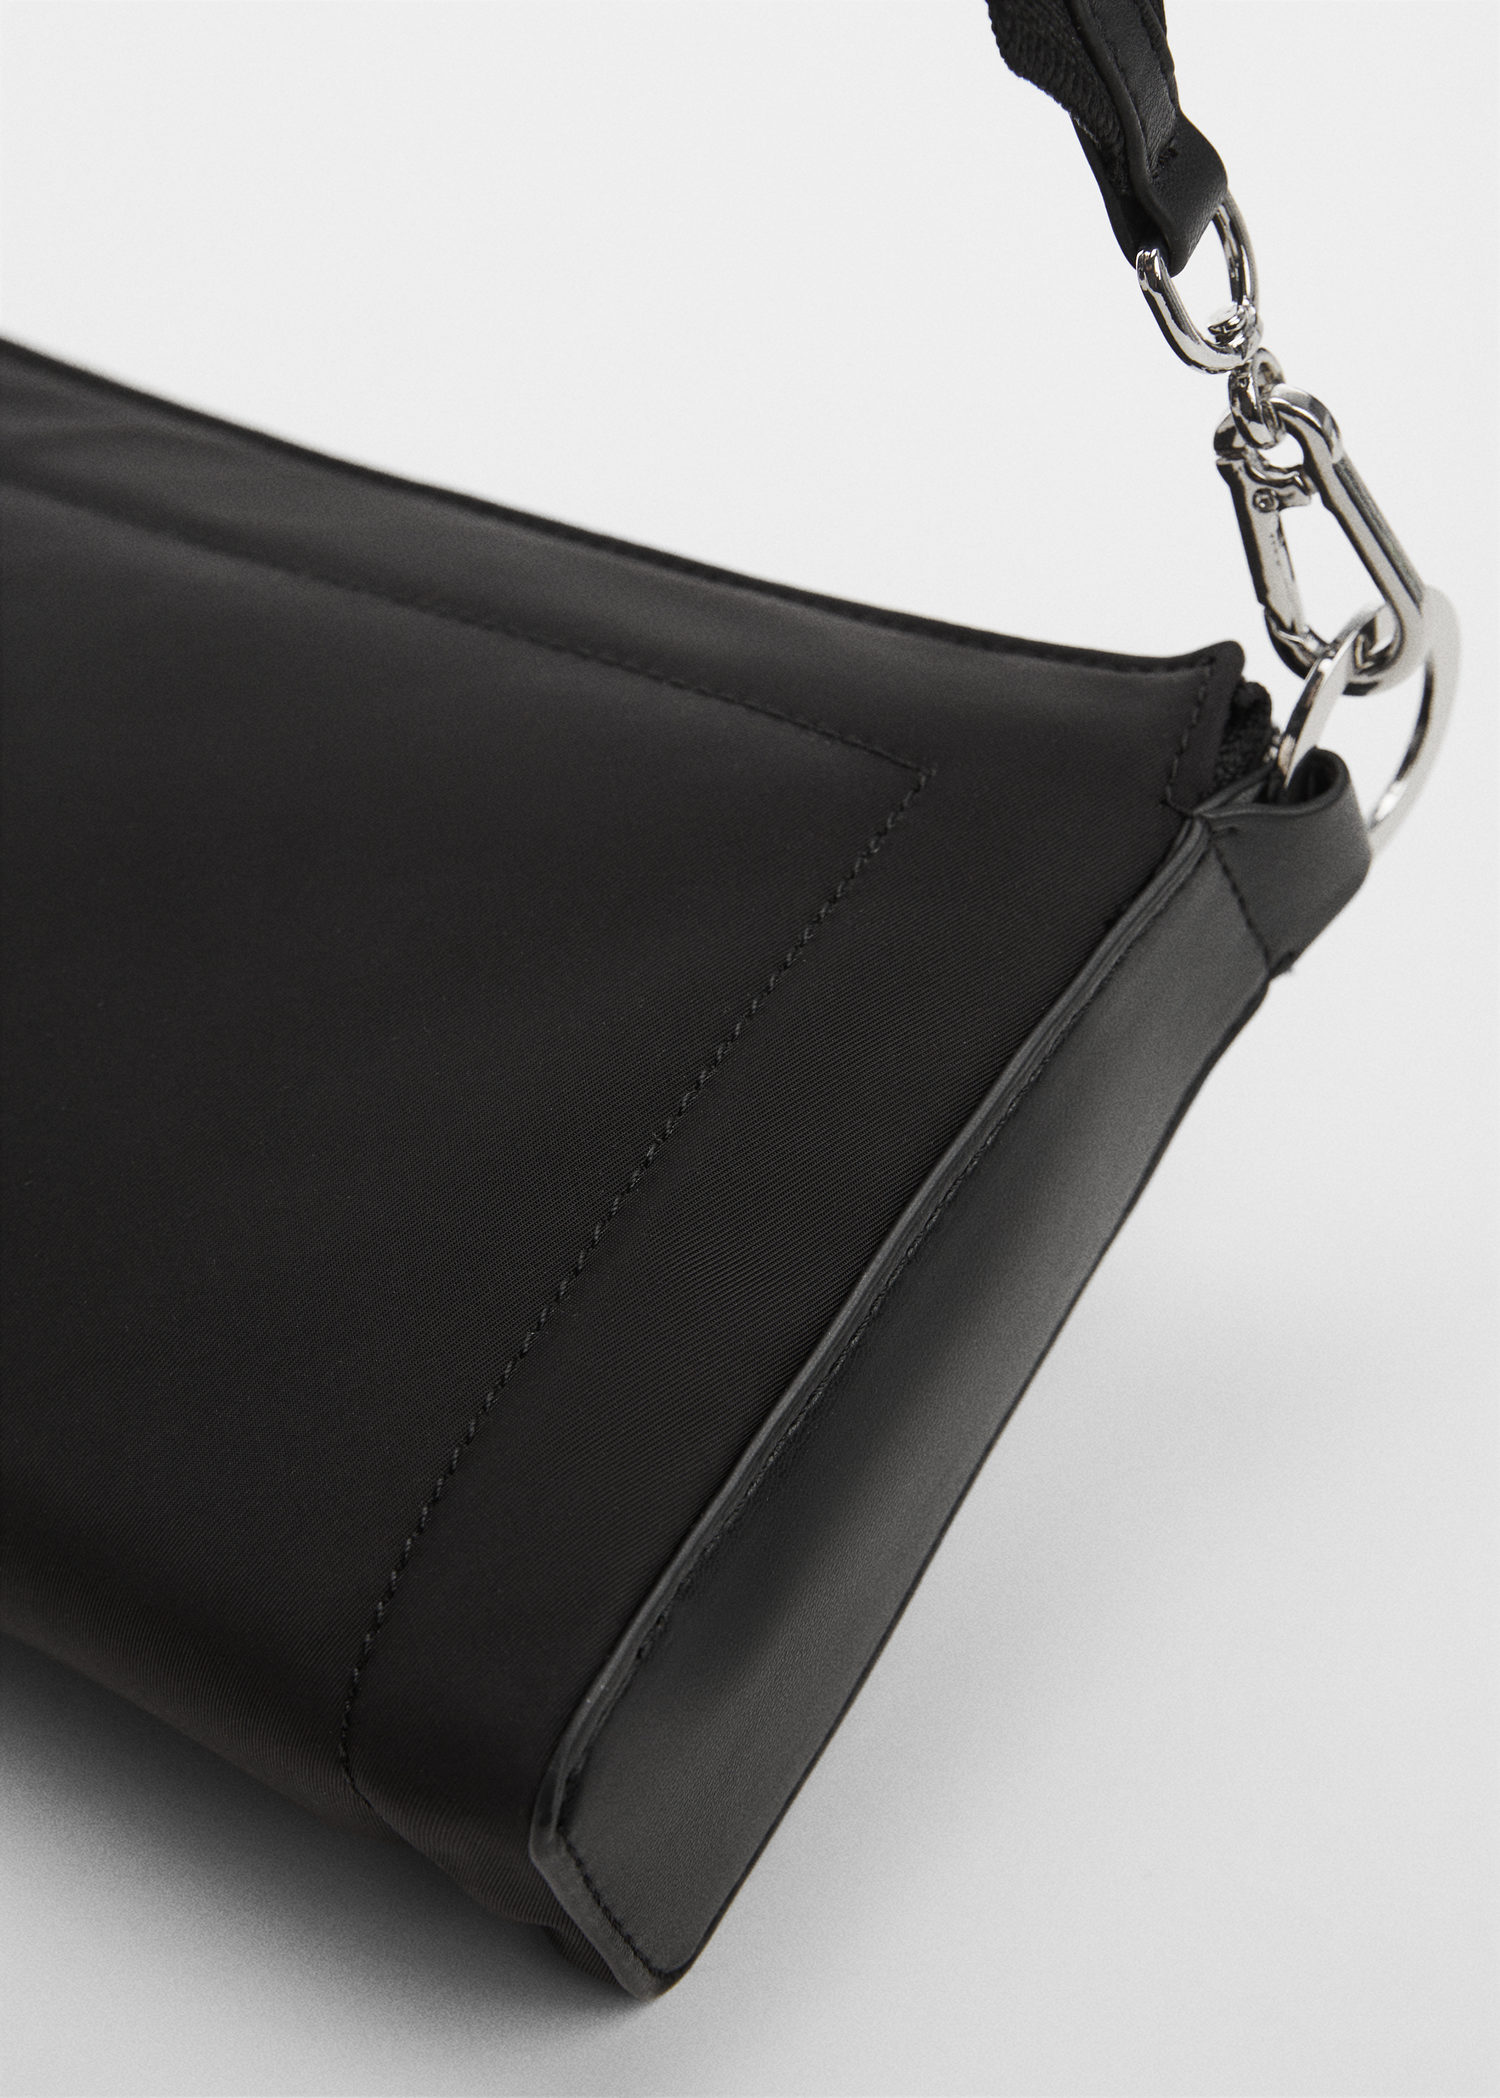 MANGO Black Solid Structured Sling Bag Price in India, Full Specifications  & Offers | DTashion.com